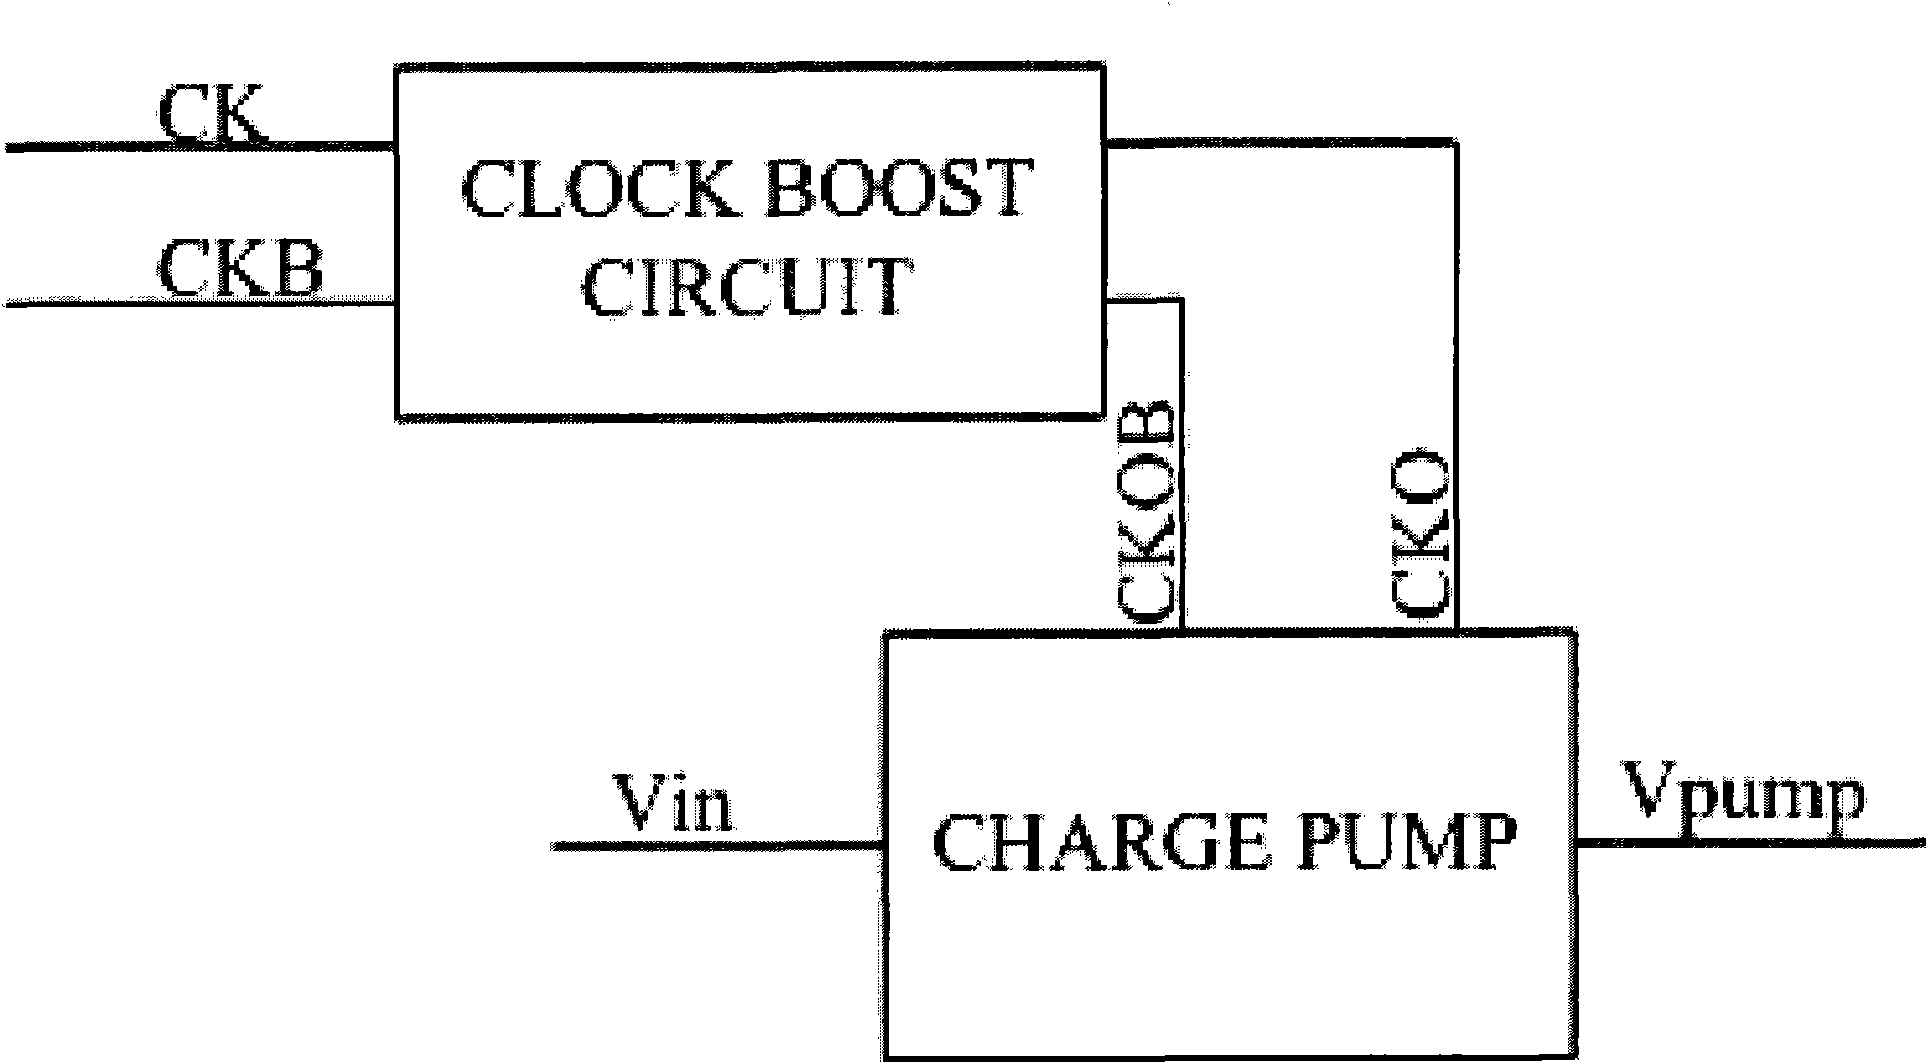 Boosting clock circuit and charge pump with same